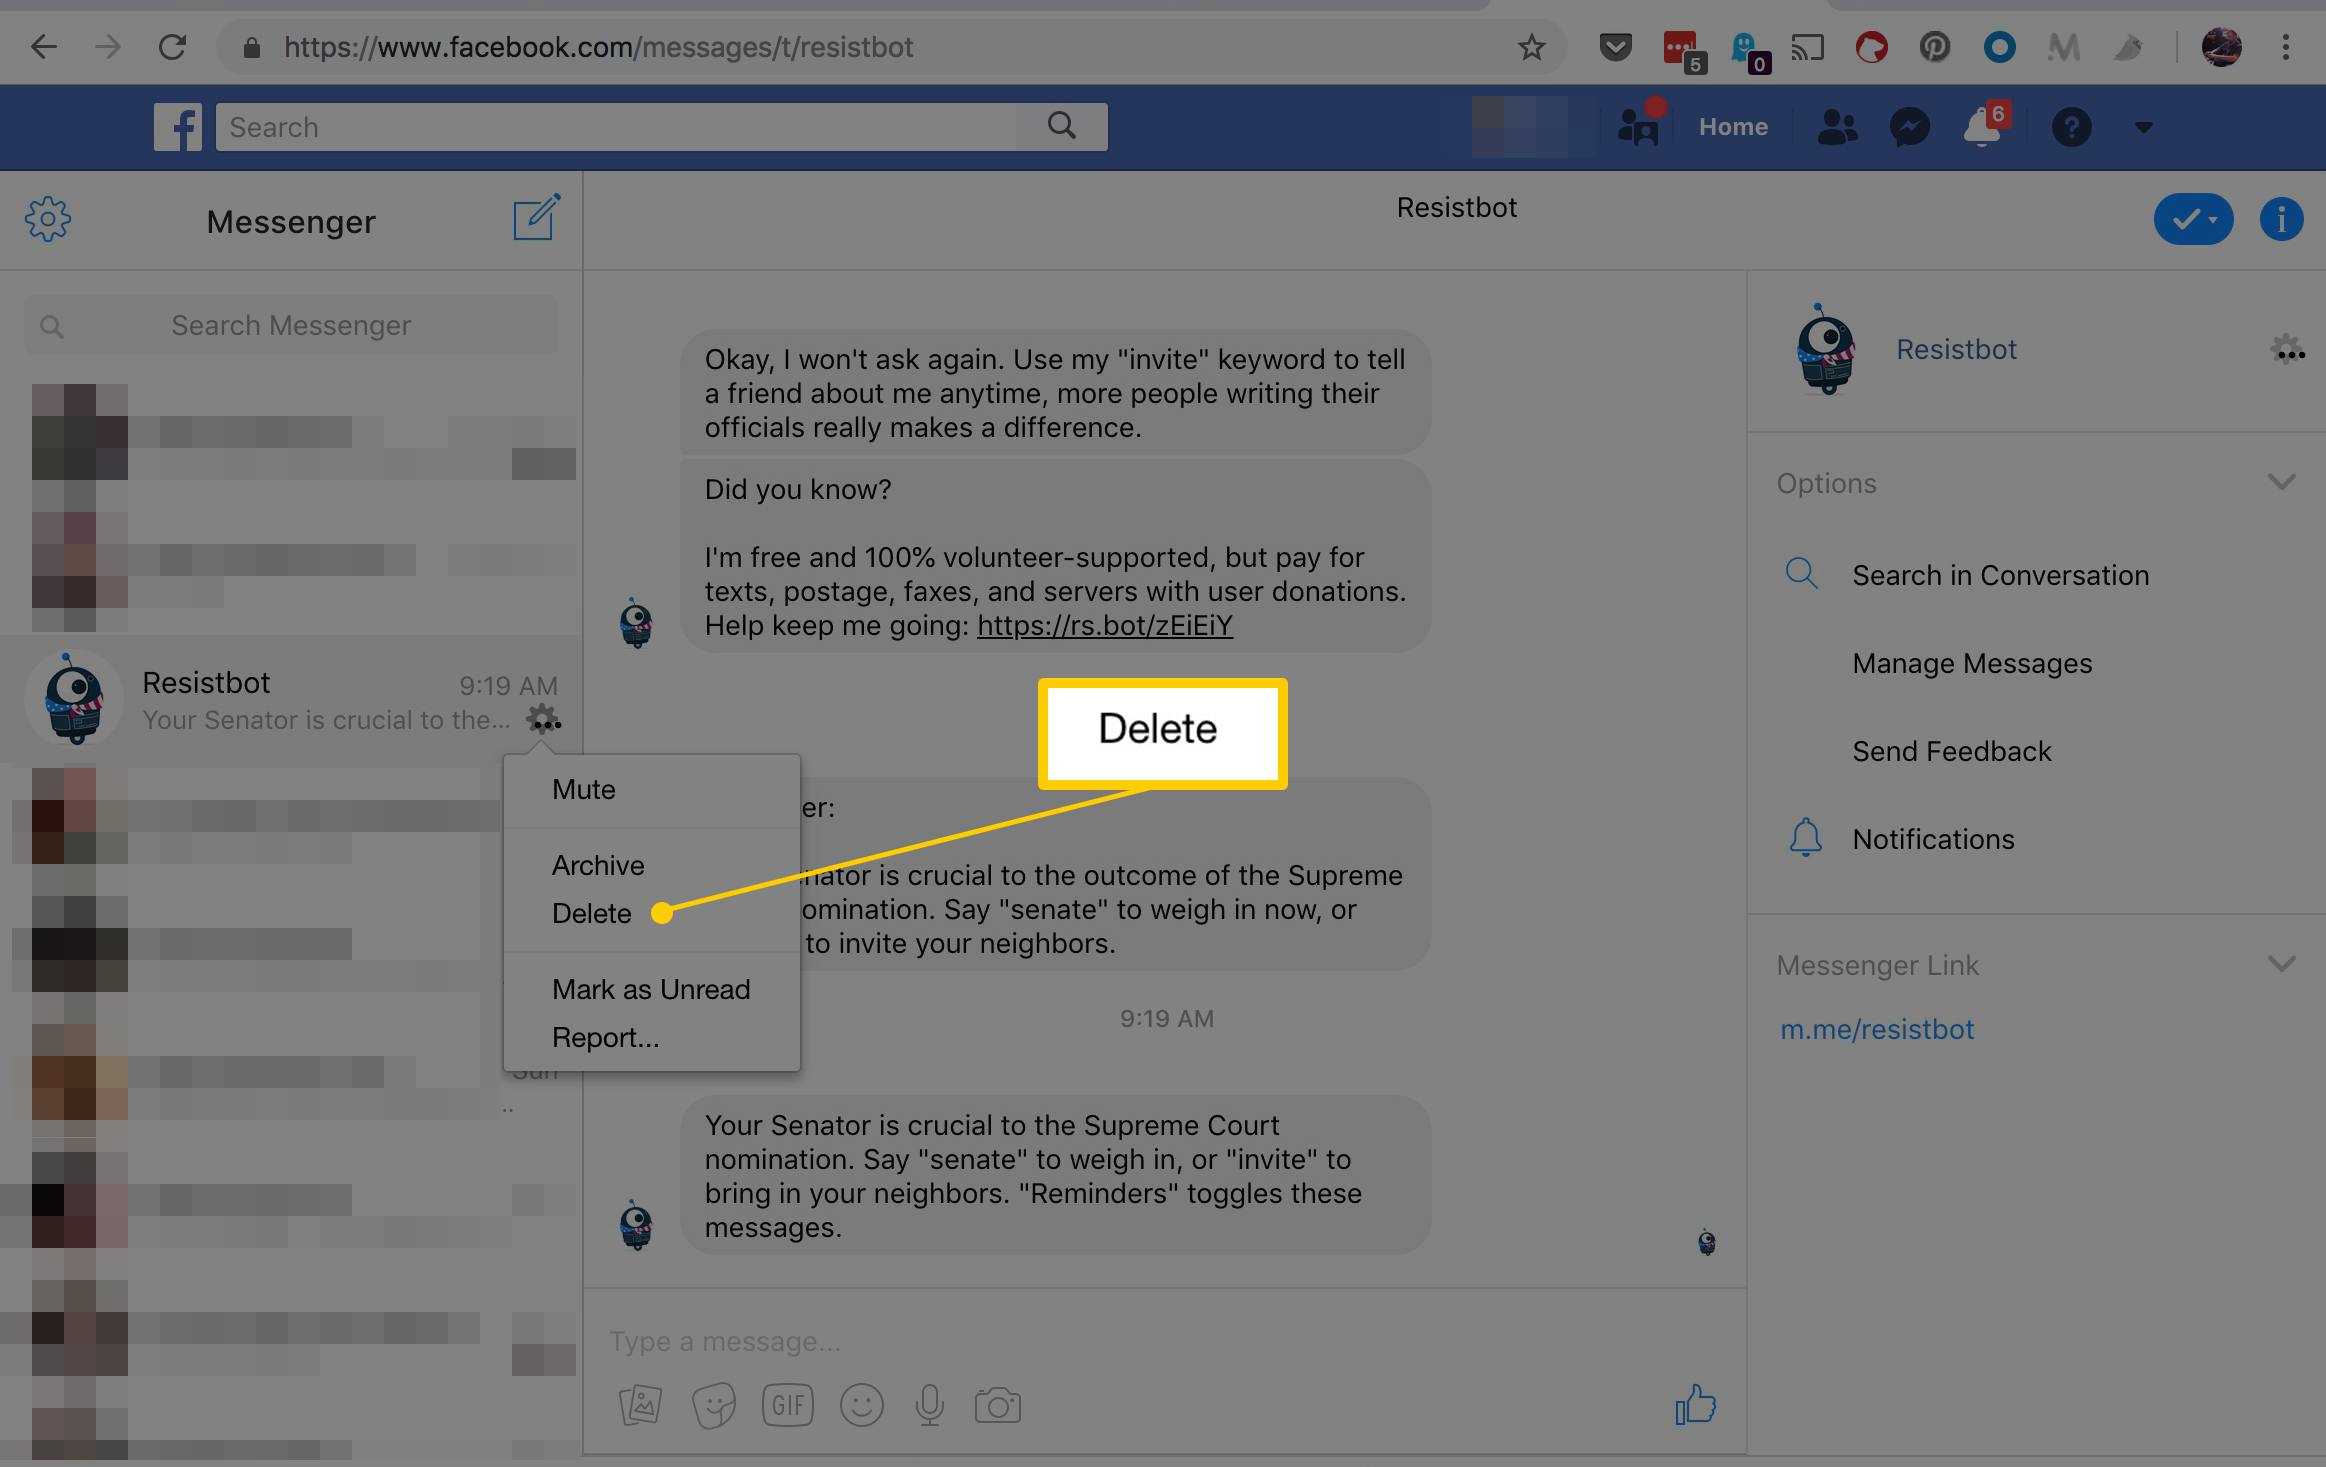 How to see all chat history on facebook